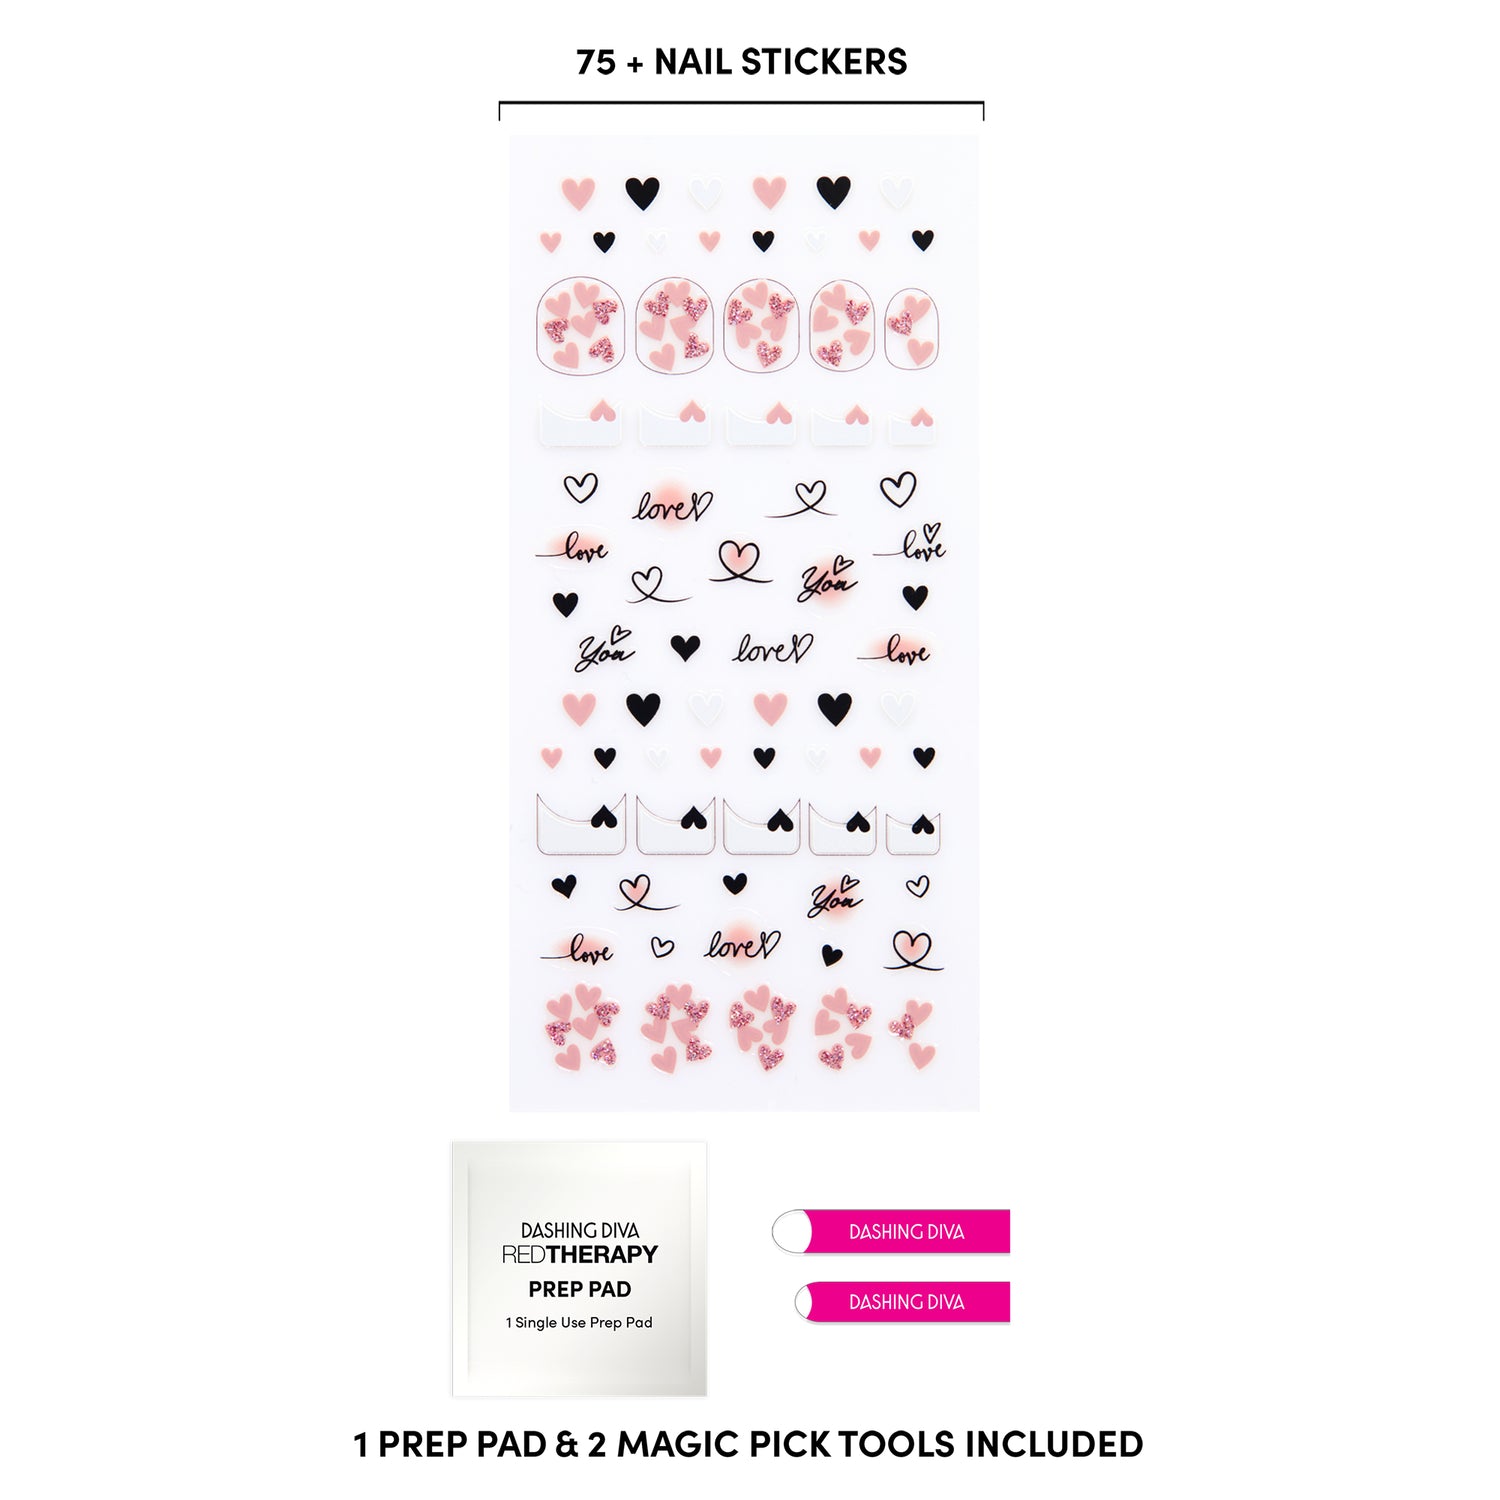 nail art stickers featuring expressive designs, including French tips with black and blush accents, glitter-filled hearts, and love notes. Prep pad, sticker applicator included